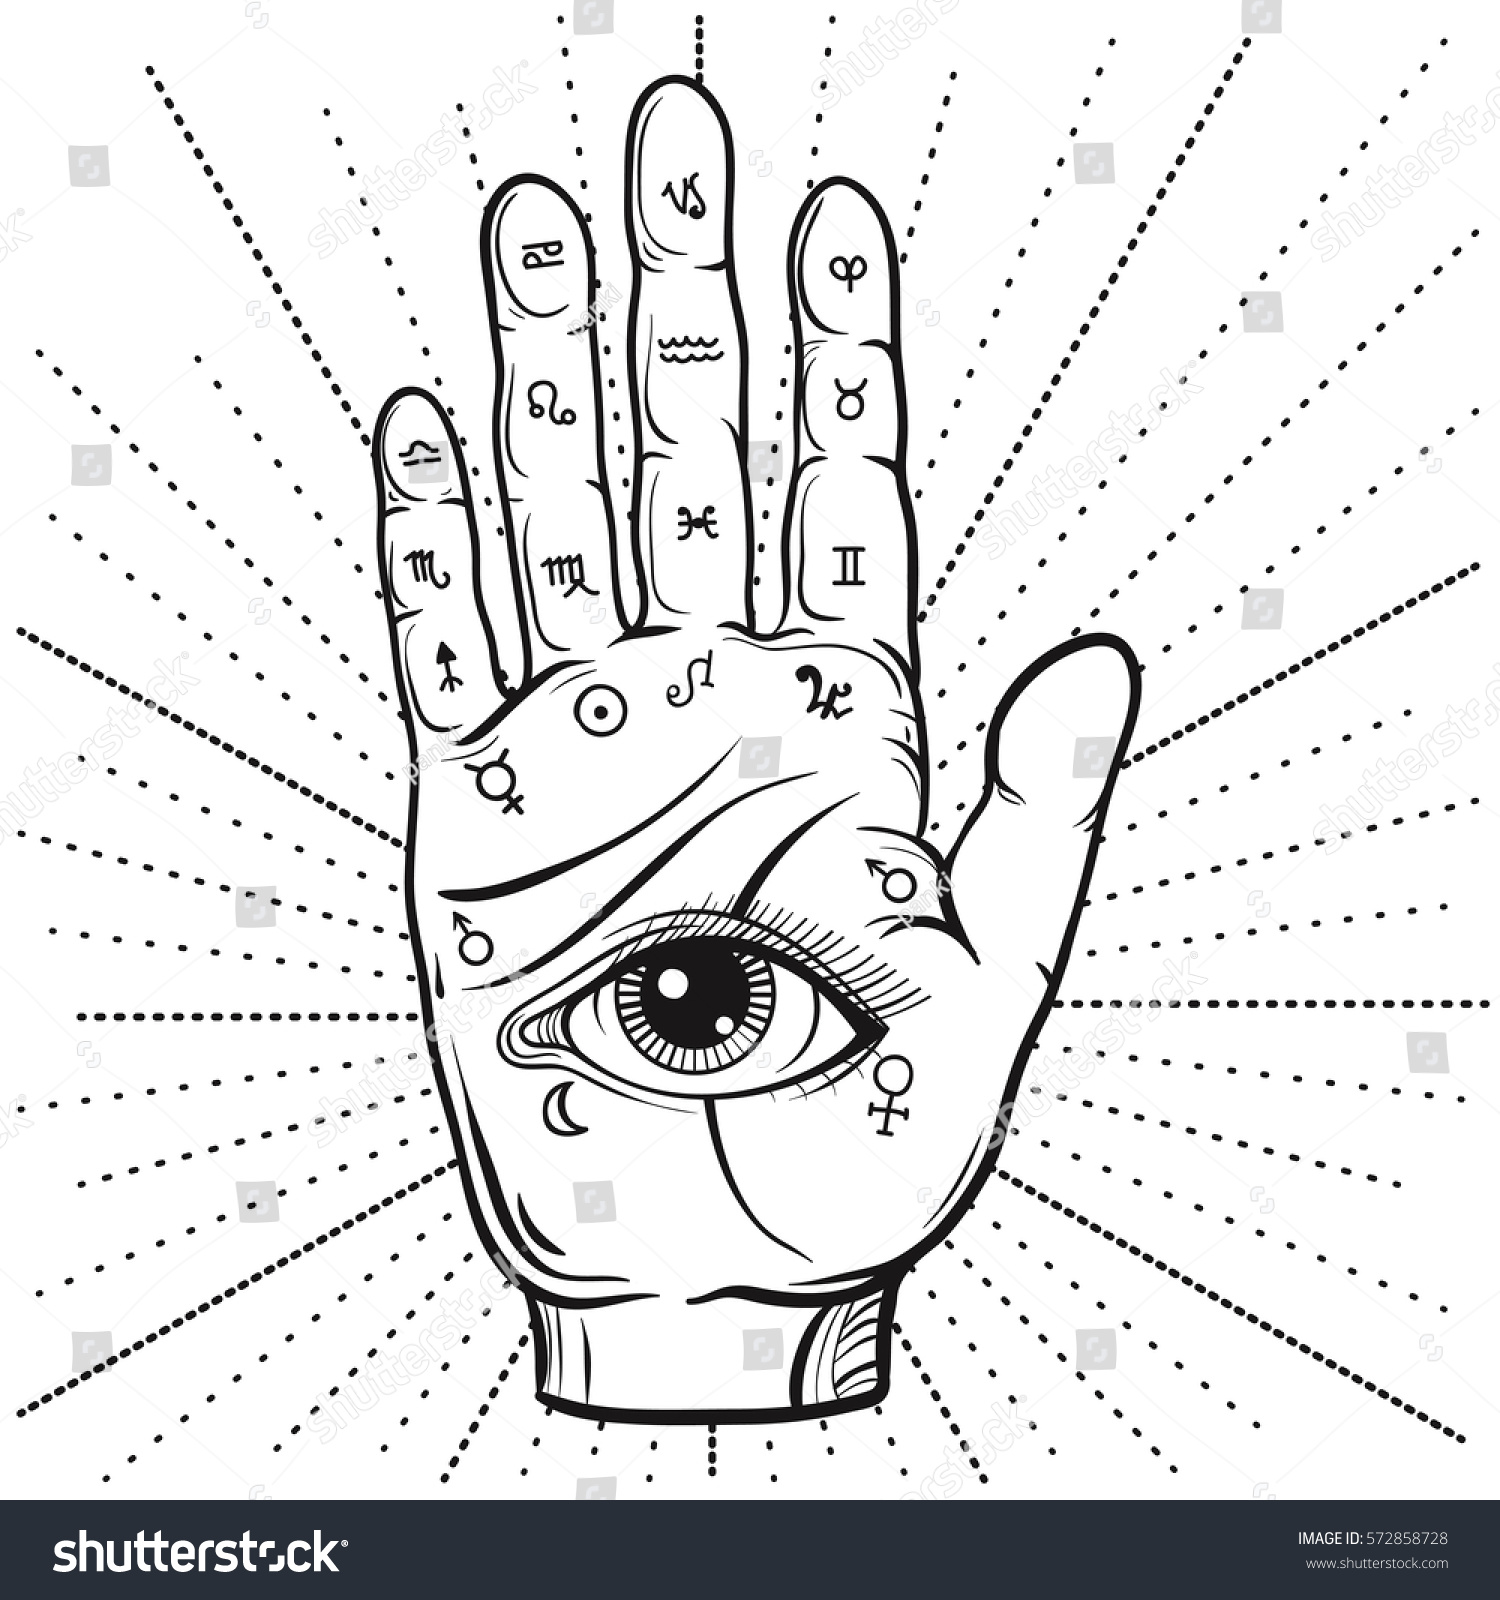 Fortune Teller Hand with Palmistry diagram, hand-drawn all seeing eye. Vector vintage illustration for tattoo template, magic alchemy spirituality zodiac symbol. #572858728